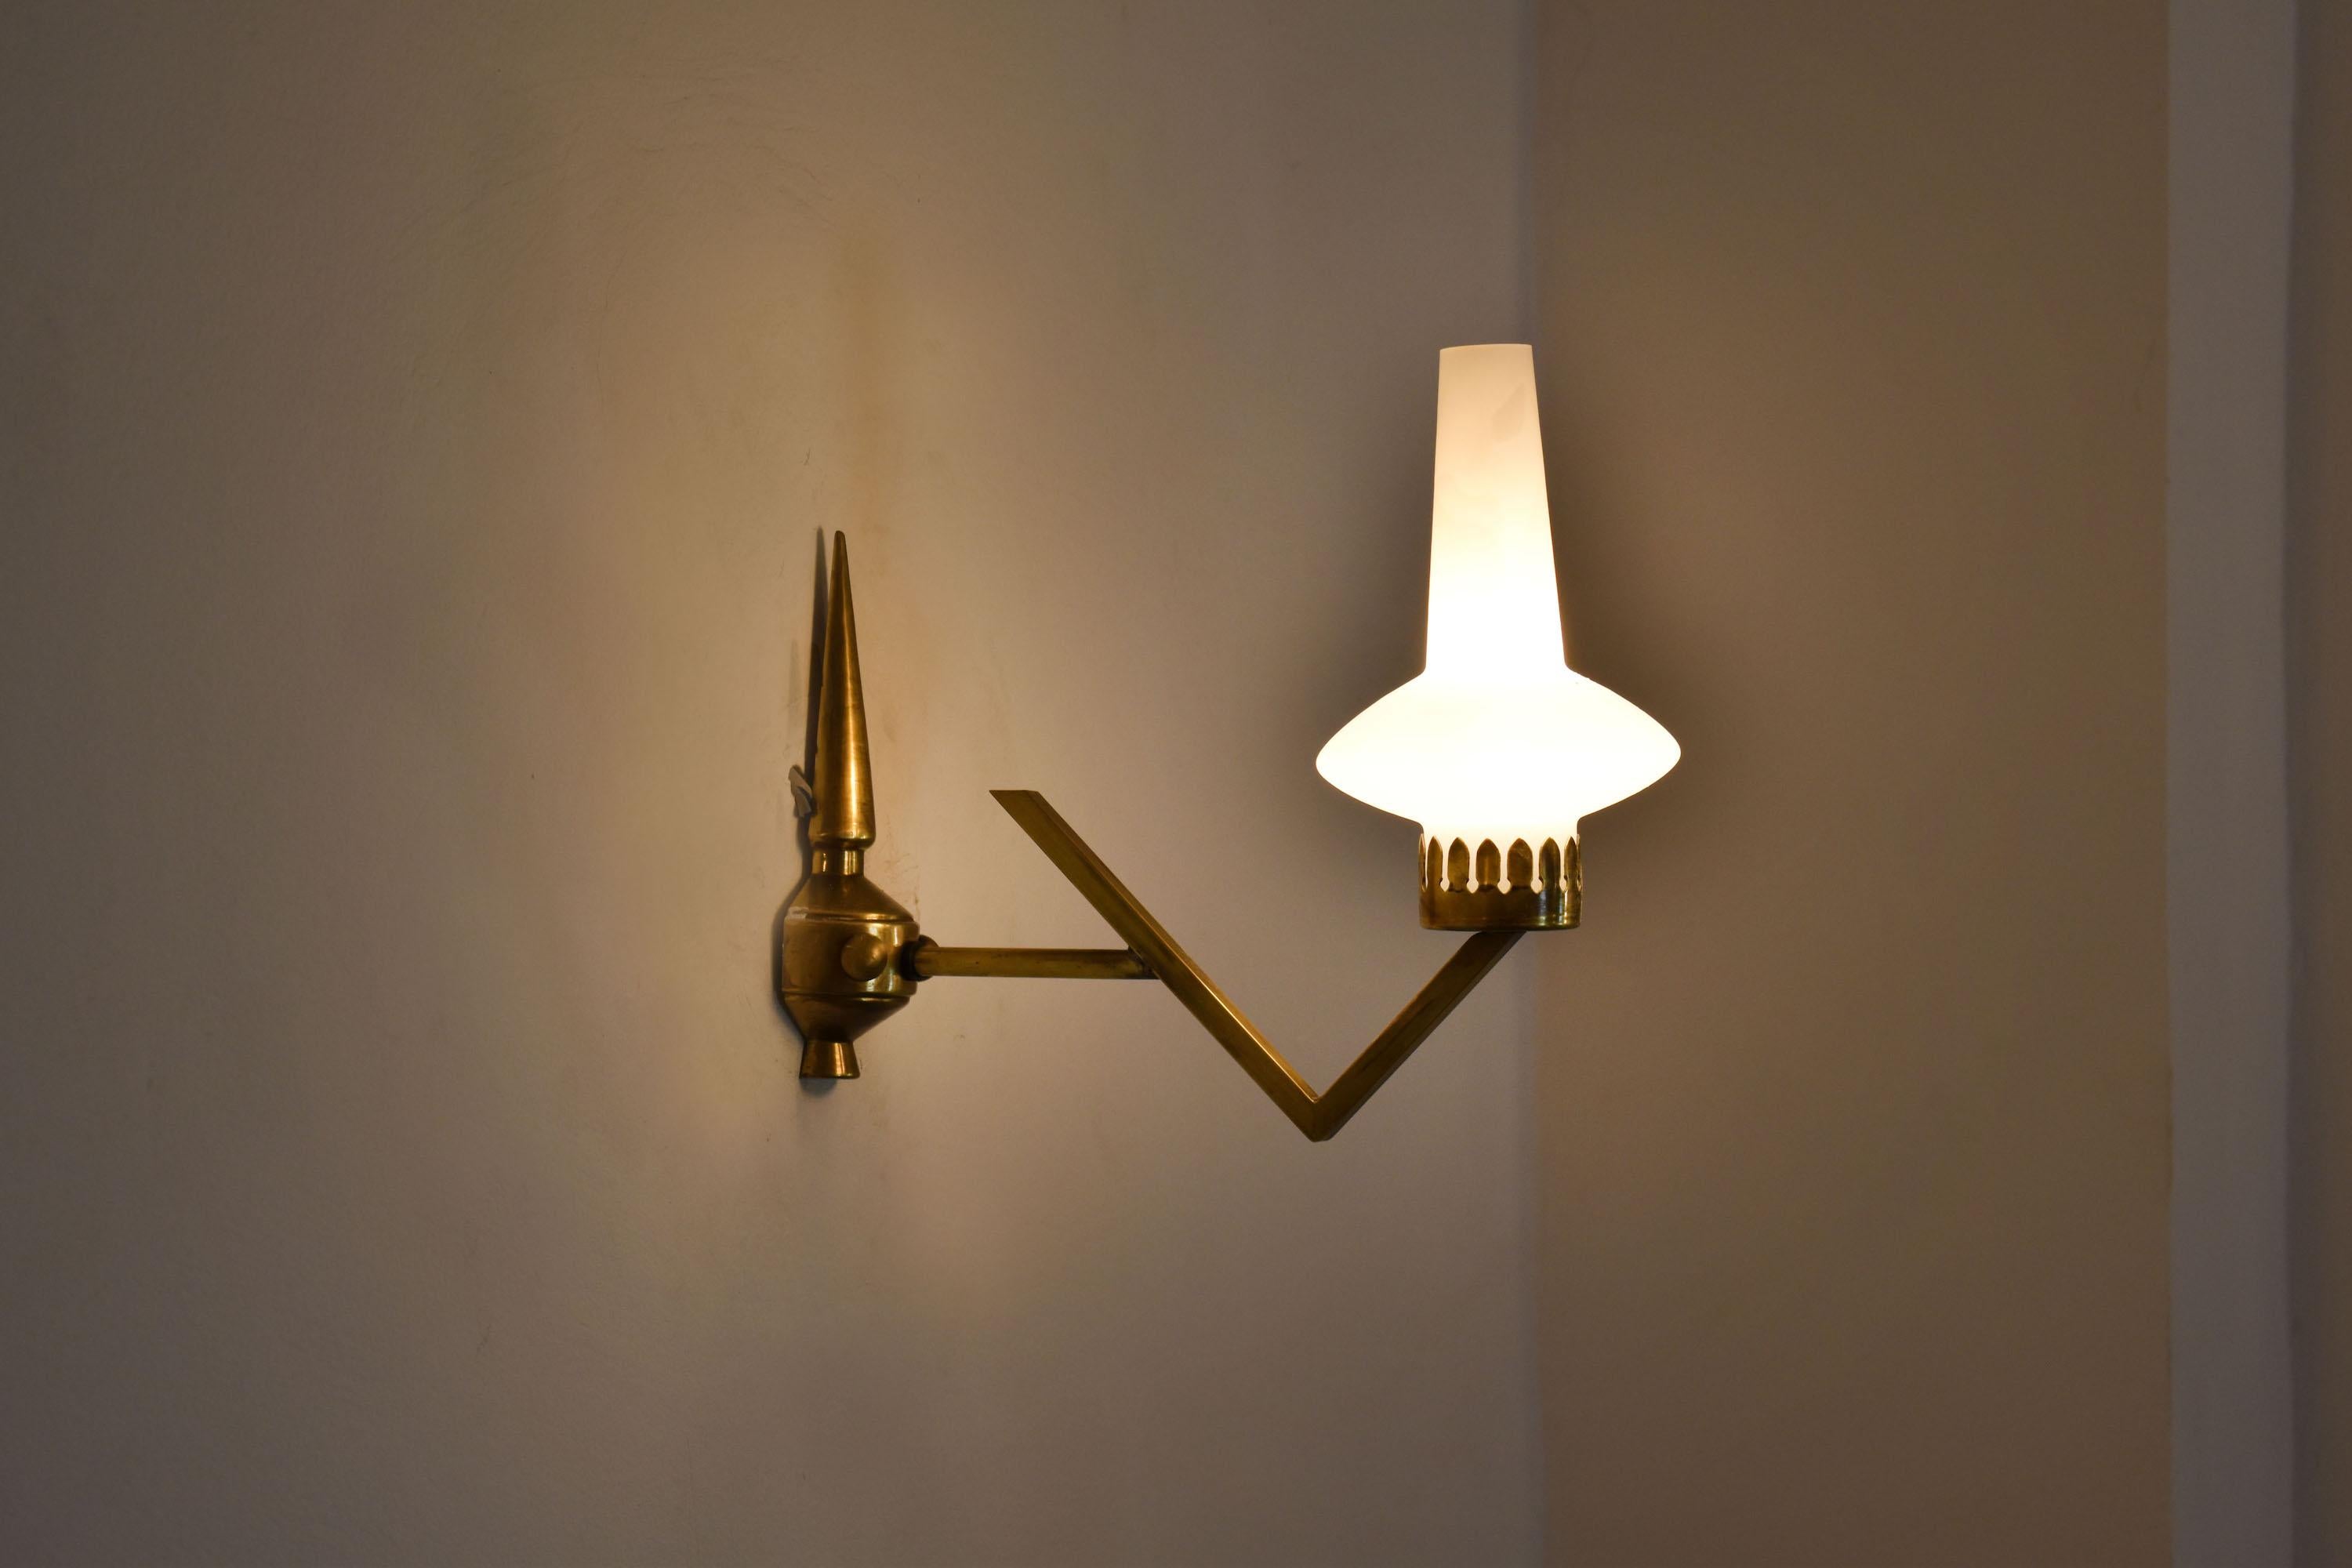 A gorgeous pair of 1950's Italian mid-century modern brass wall light or sconces. The angular solid gold brass arm and sophisticated mounting plate have a timeless sophisticated allure. 
The glass is in excellent condition. We have an extra glass